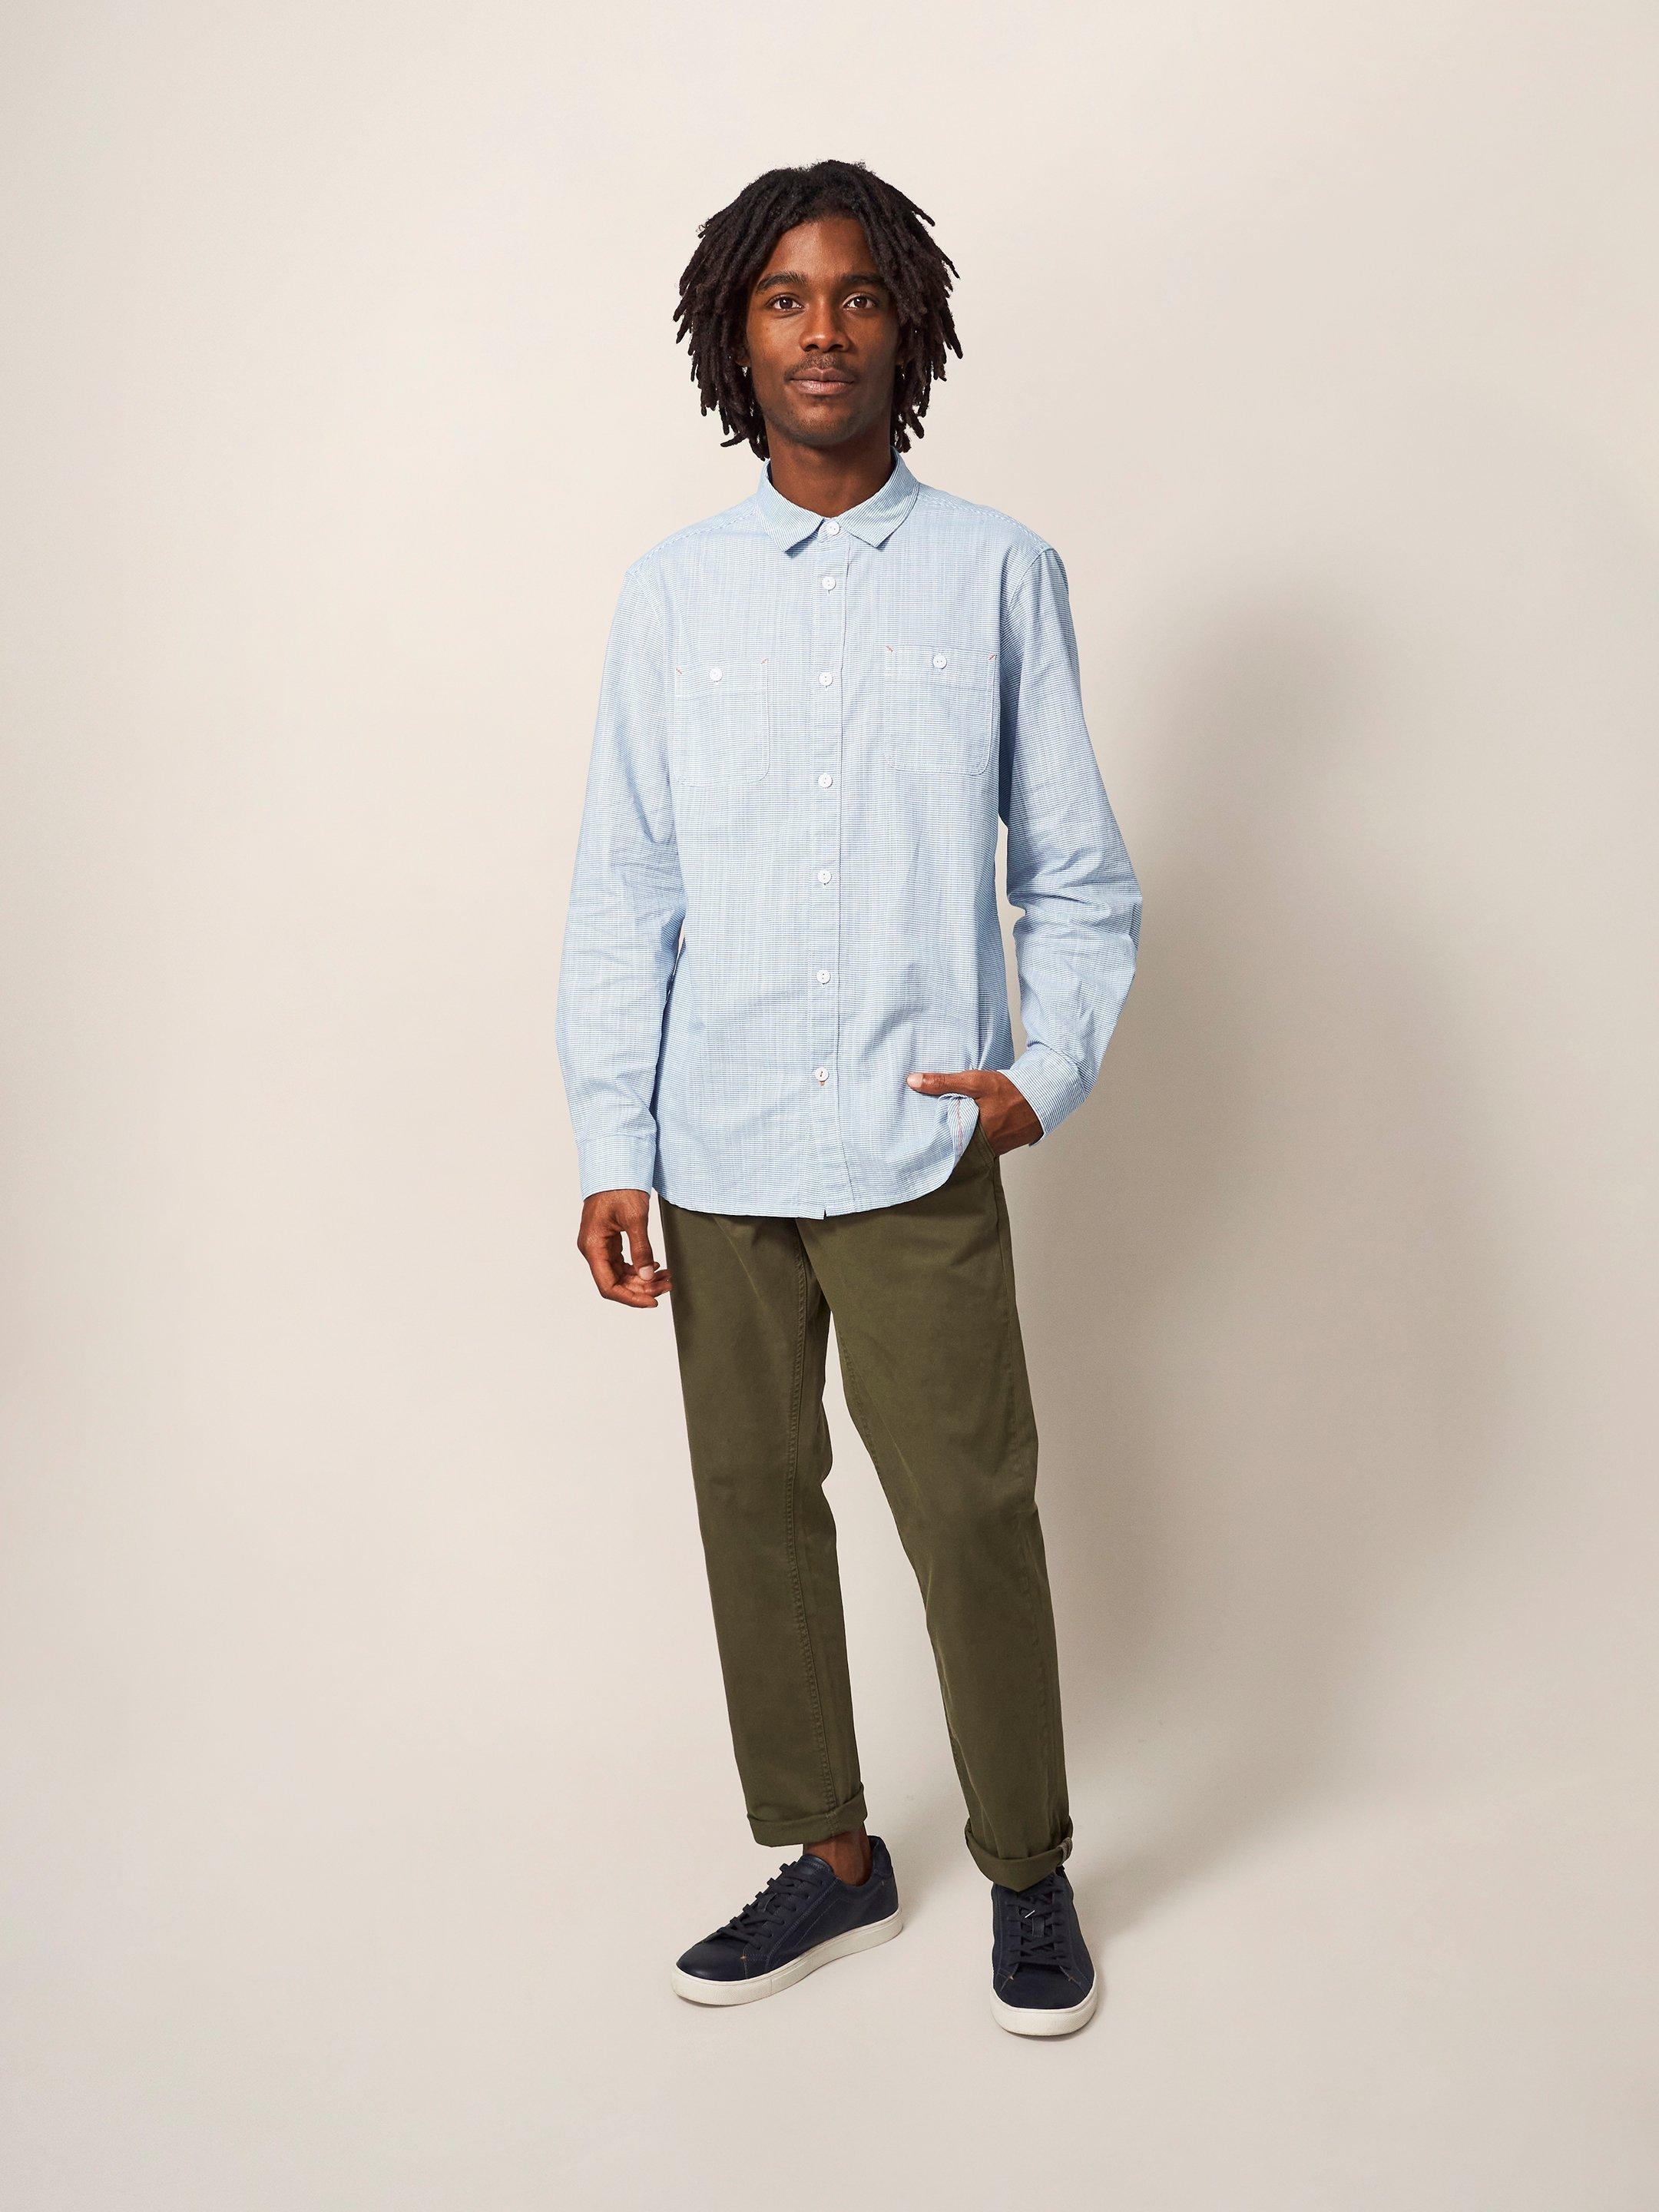 Topping Stripe Shirt in LGT BLUE - MODEL FRONT